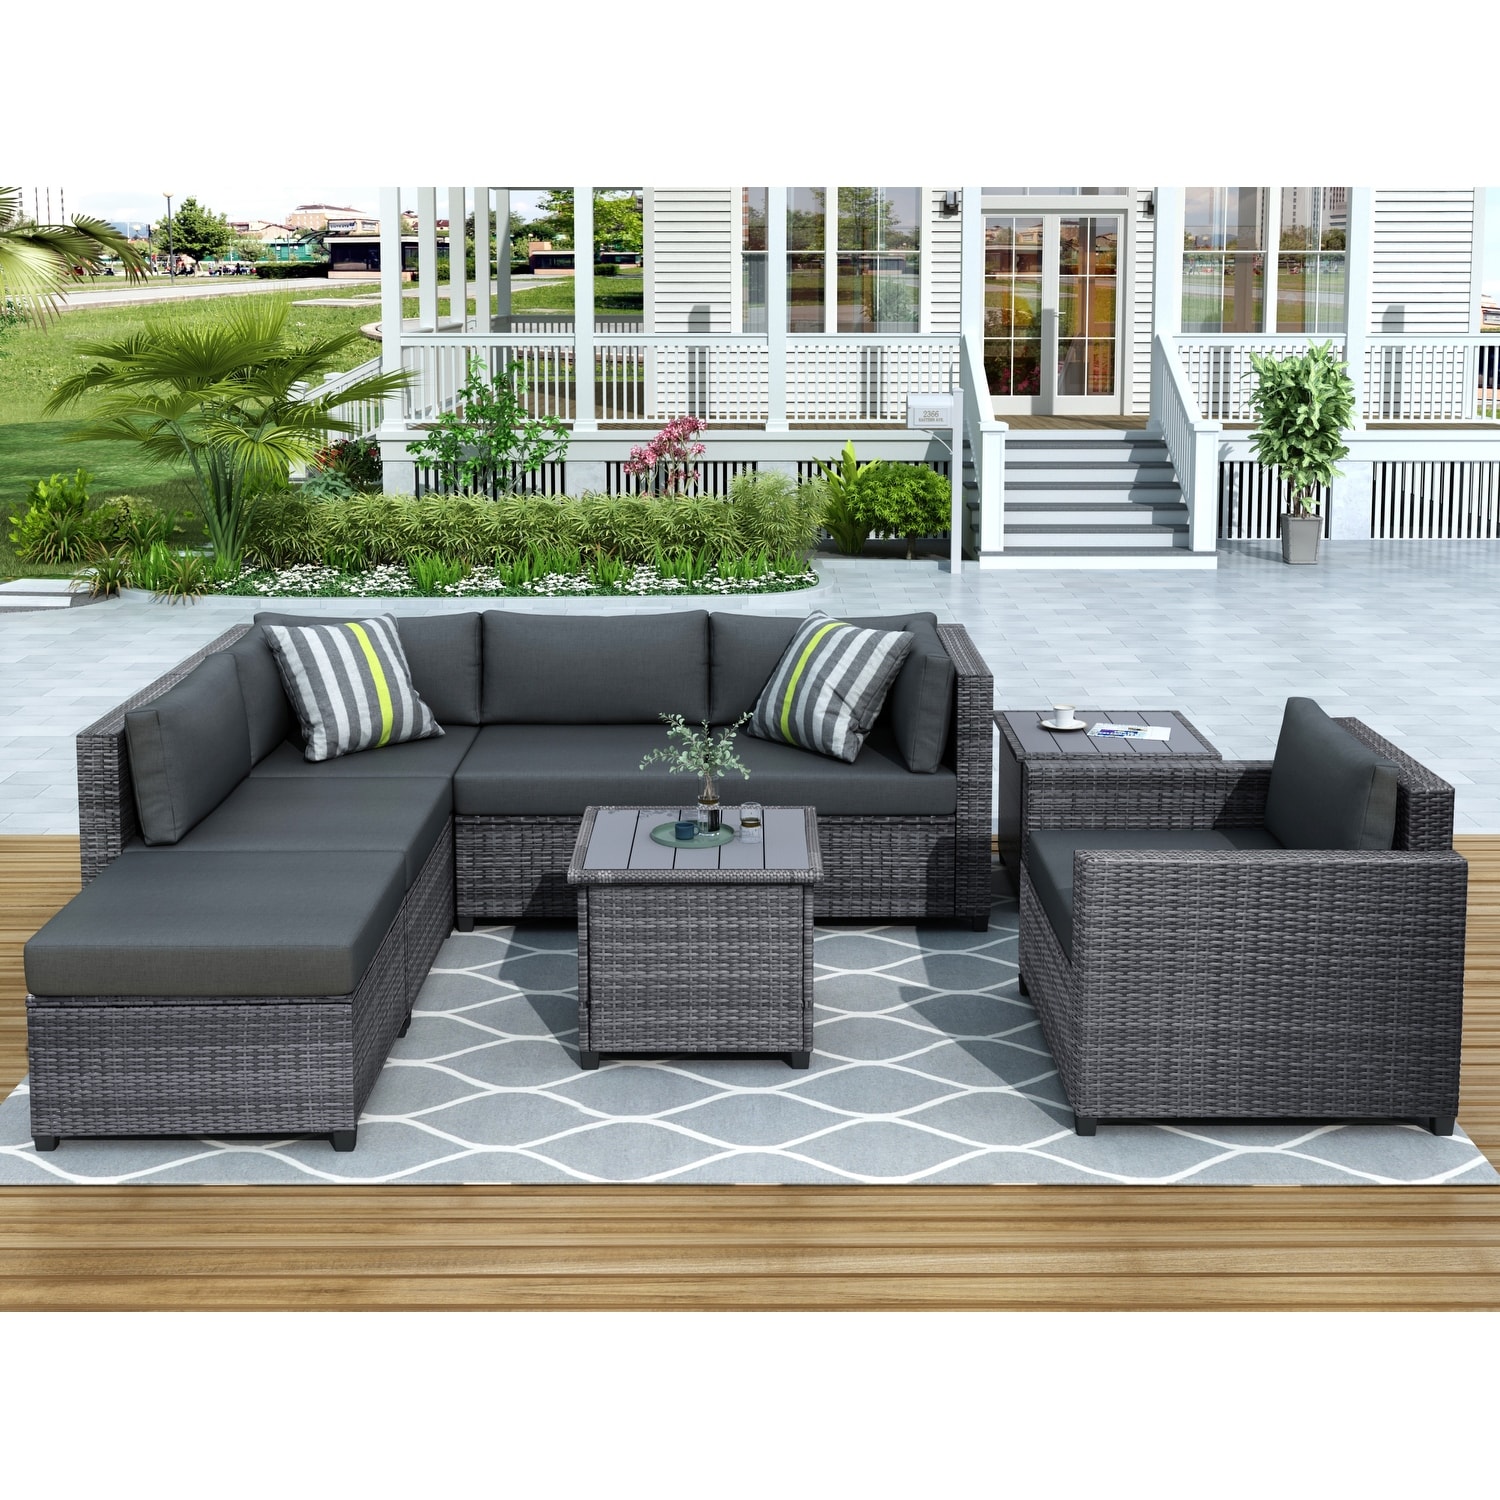 8 Piece Rattan Sectional Seating Group With Cushions  Patio Furniture Sets  Outdoor Wicker Sectional Sofa With Ottoman and Tables